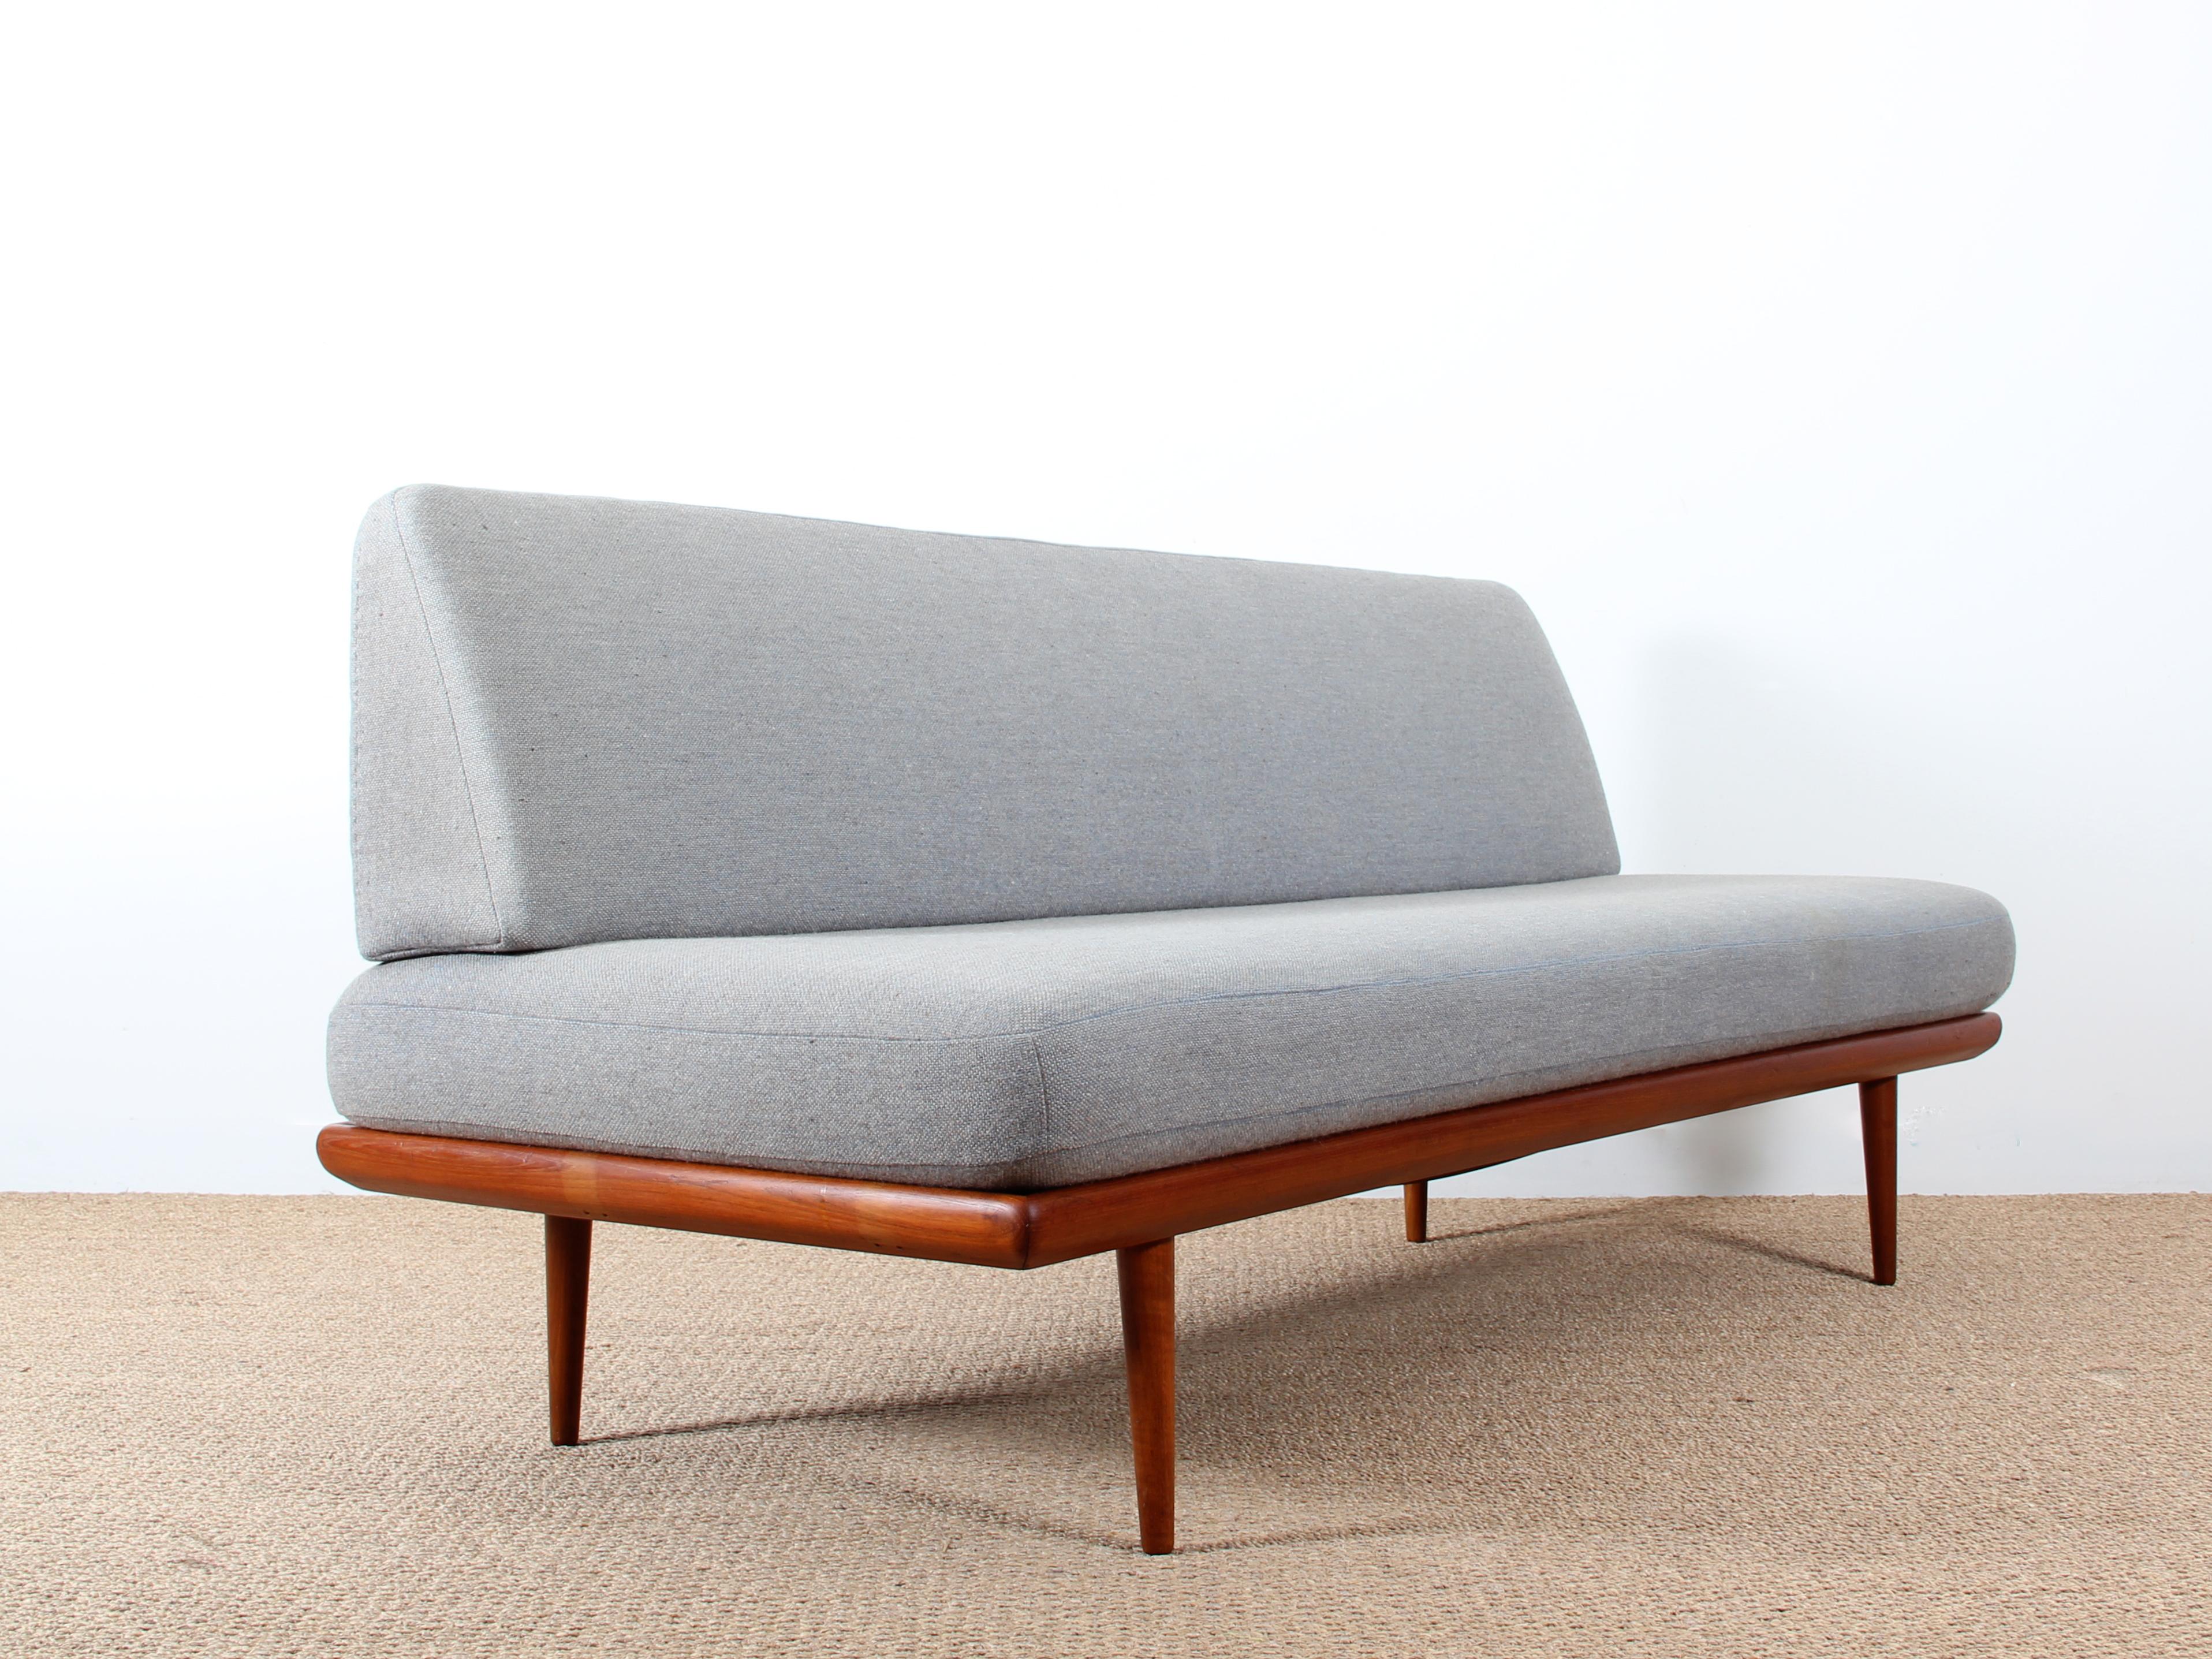 Minerva daybed by Peter Hvidt & Orla Mølgaard-Nielsen. Matress and back will be reupholstered with fabric of your choice. The price includes the renovation.